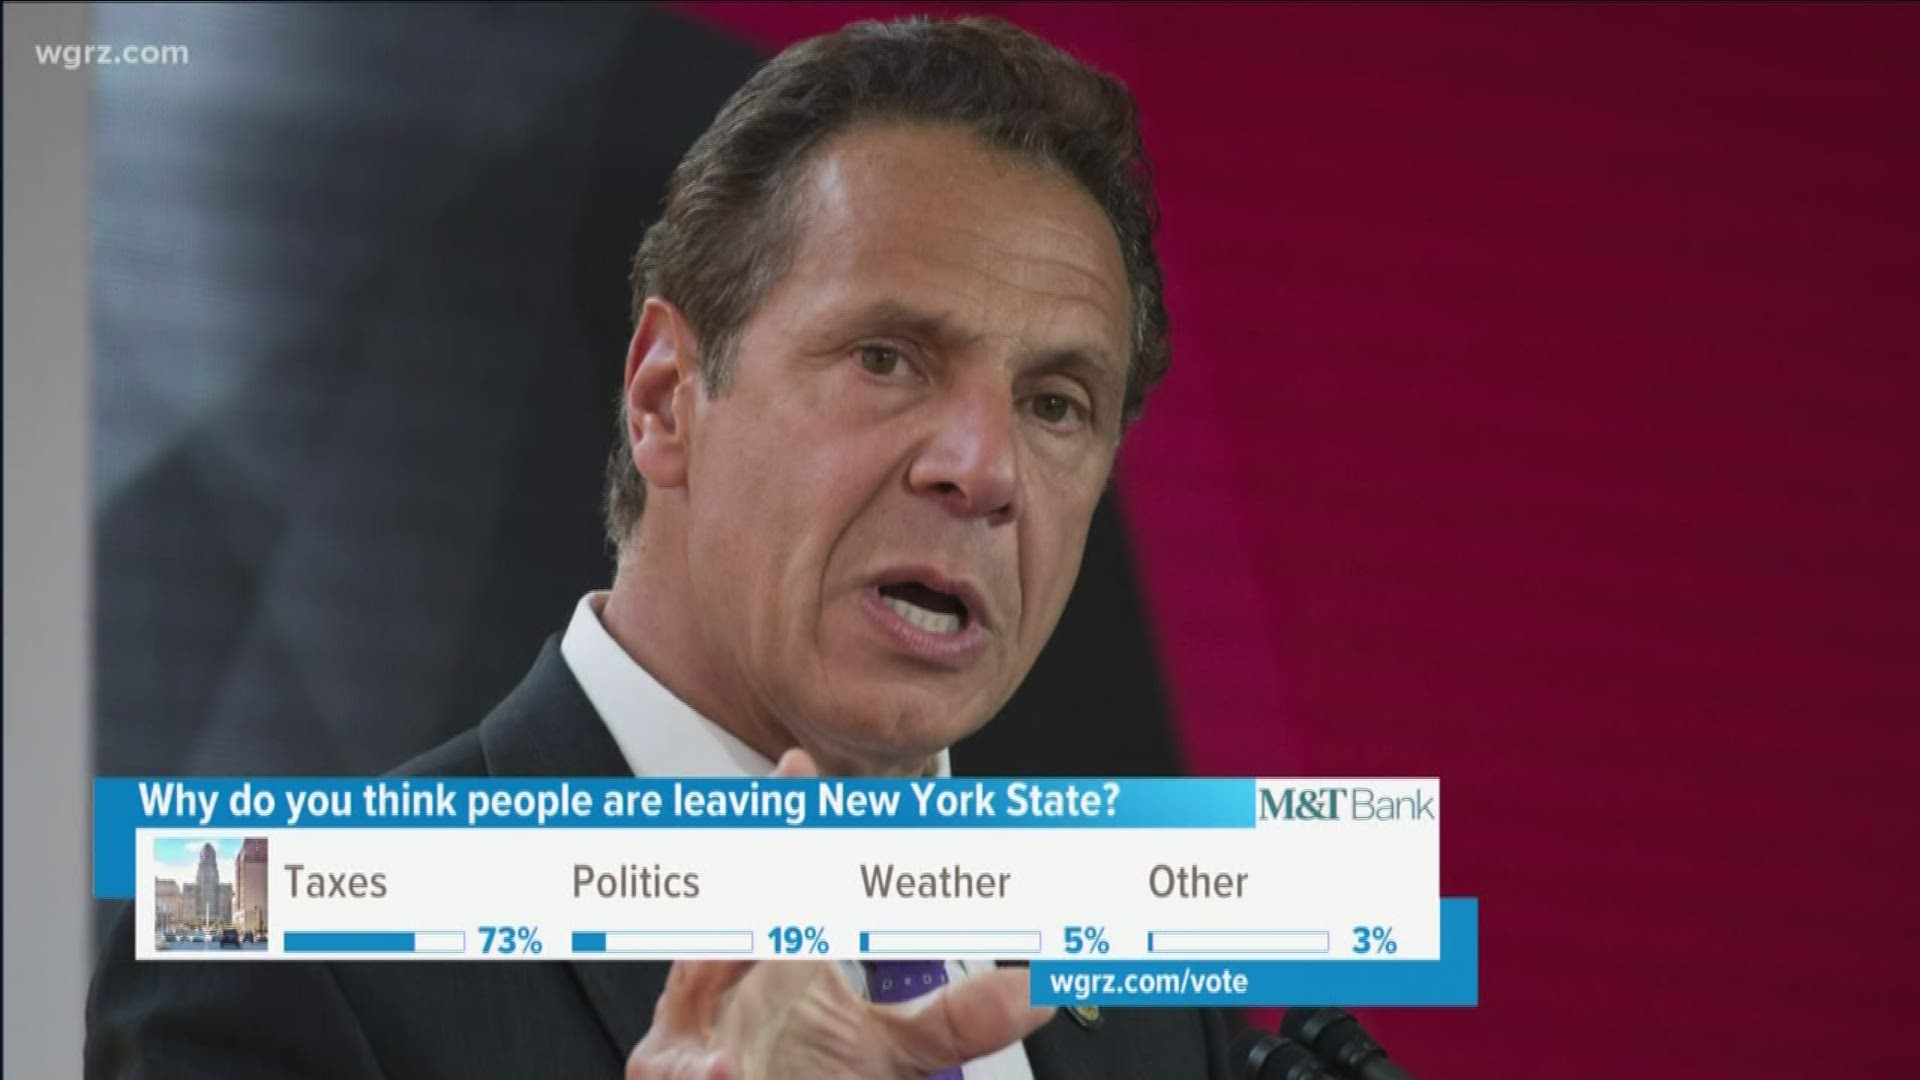 Lawmakers are trying to figure out why people are leaving NY